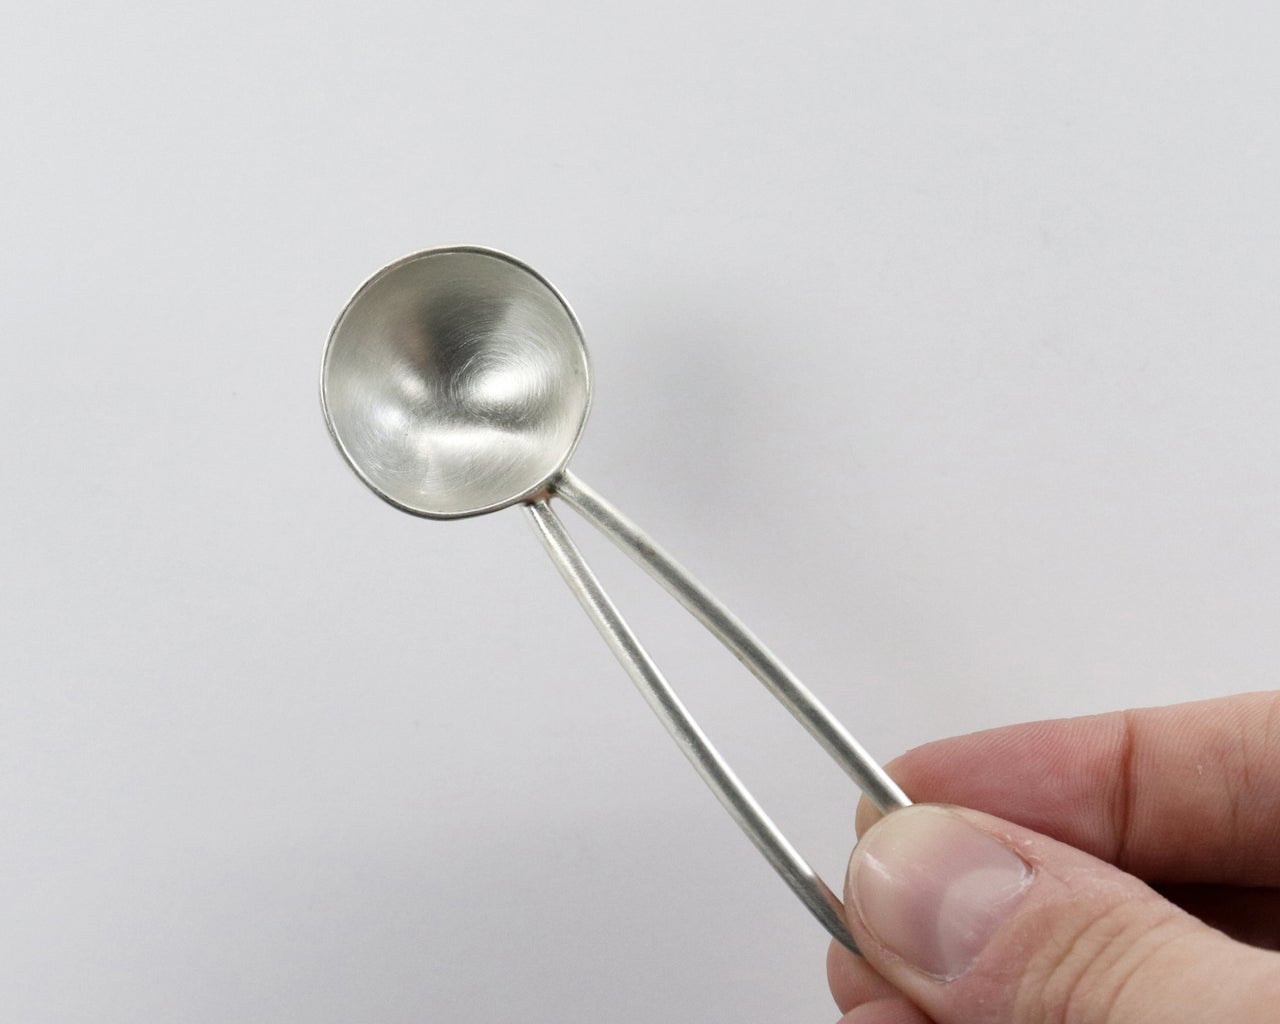 Stainless Steel Silver Small spoon 4 grams, Size: 3.15 Inch